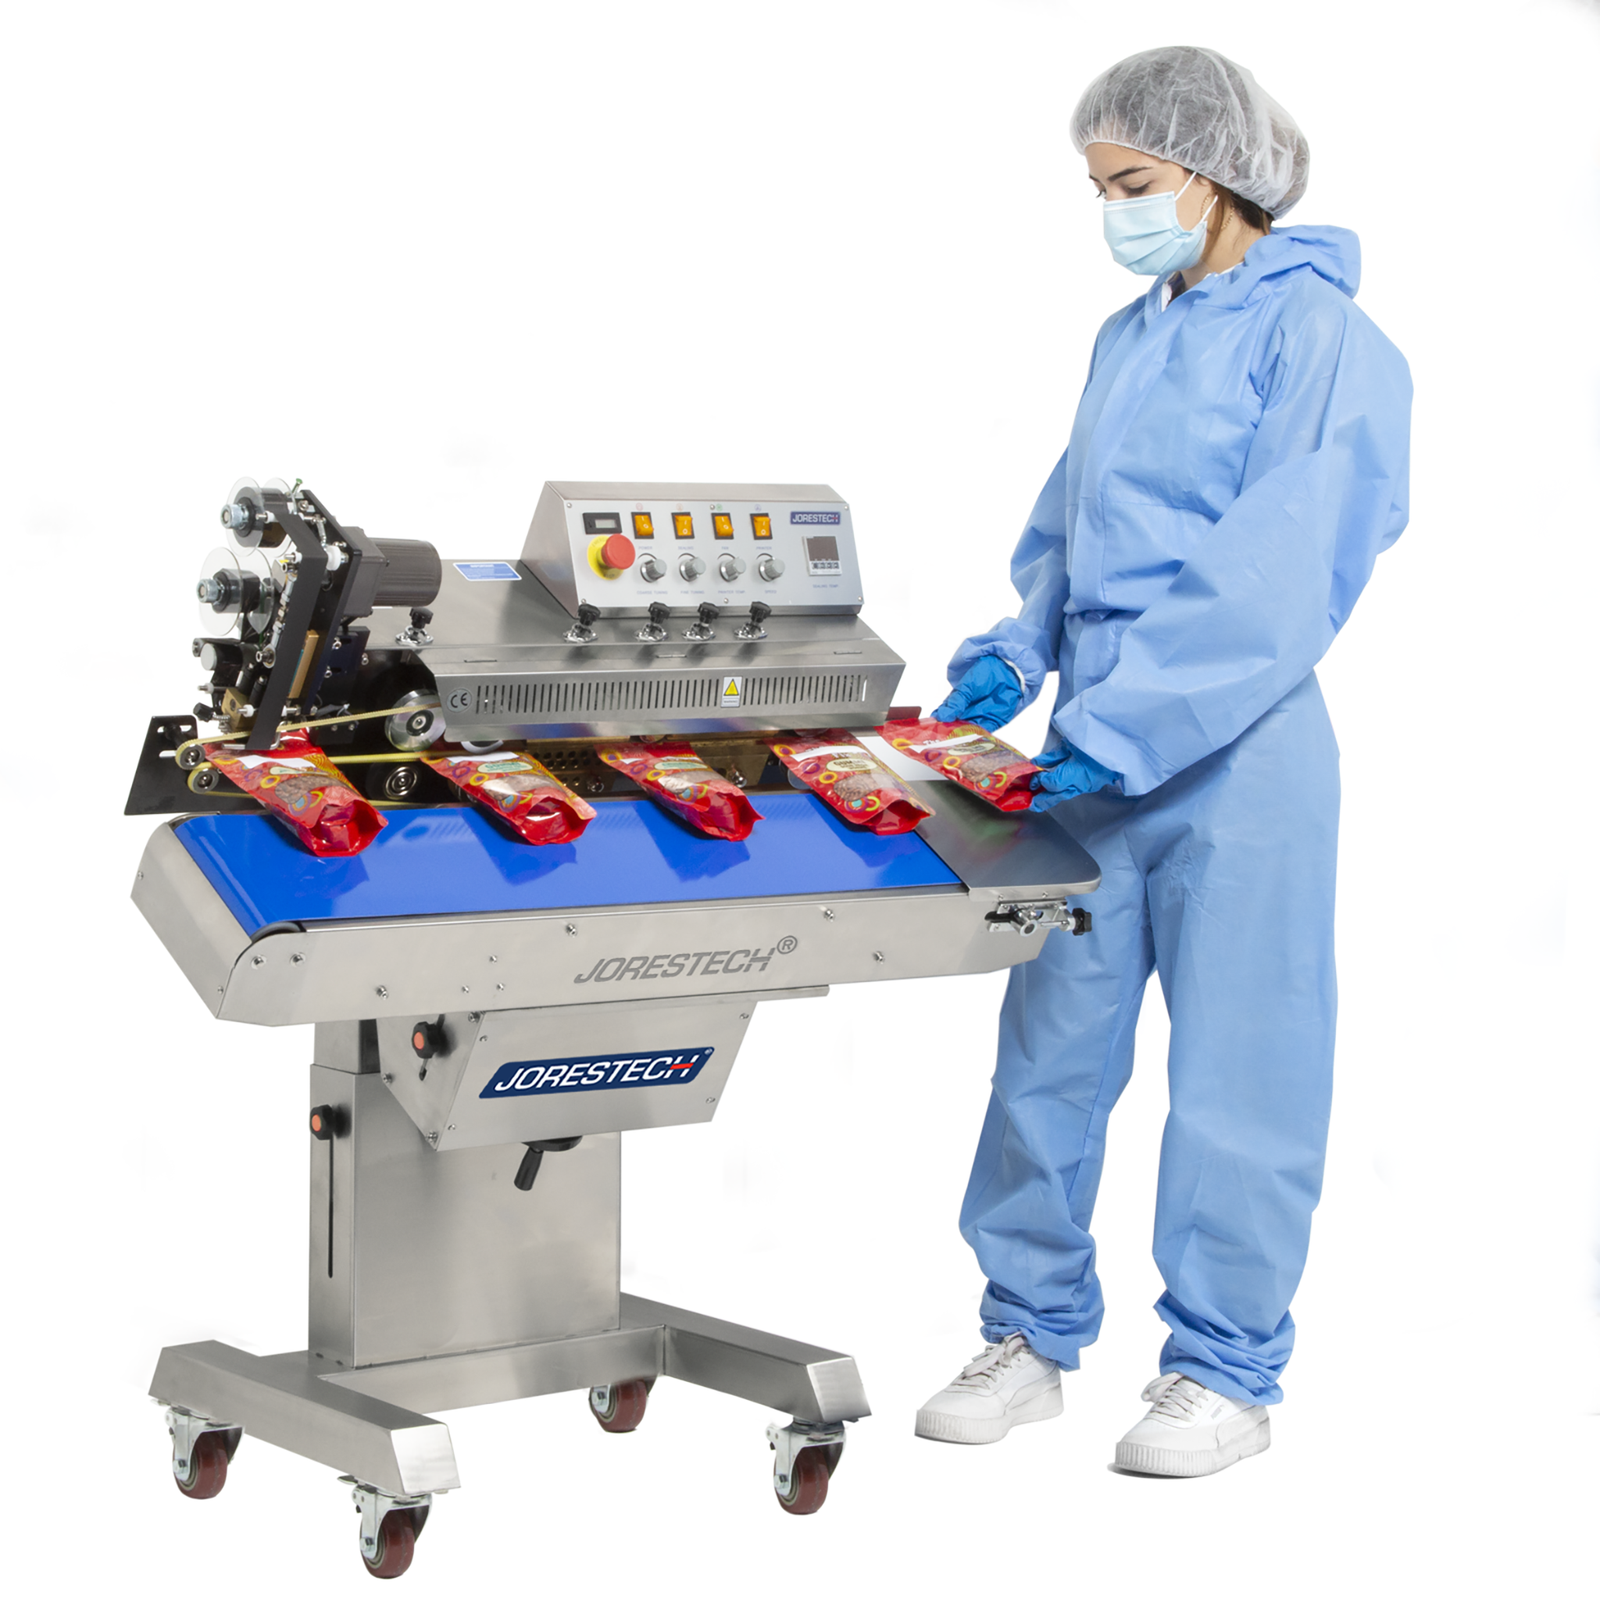 operator wearing blue overall inserting red plastic bag to be sealed and codded by stainless steel JORESTECH continuous band sealer. All the machine except the base is tilted forward showing that the machine can be adjusted to horizontal or to a tilted position